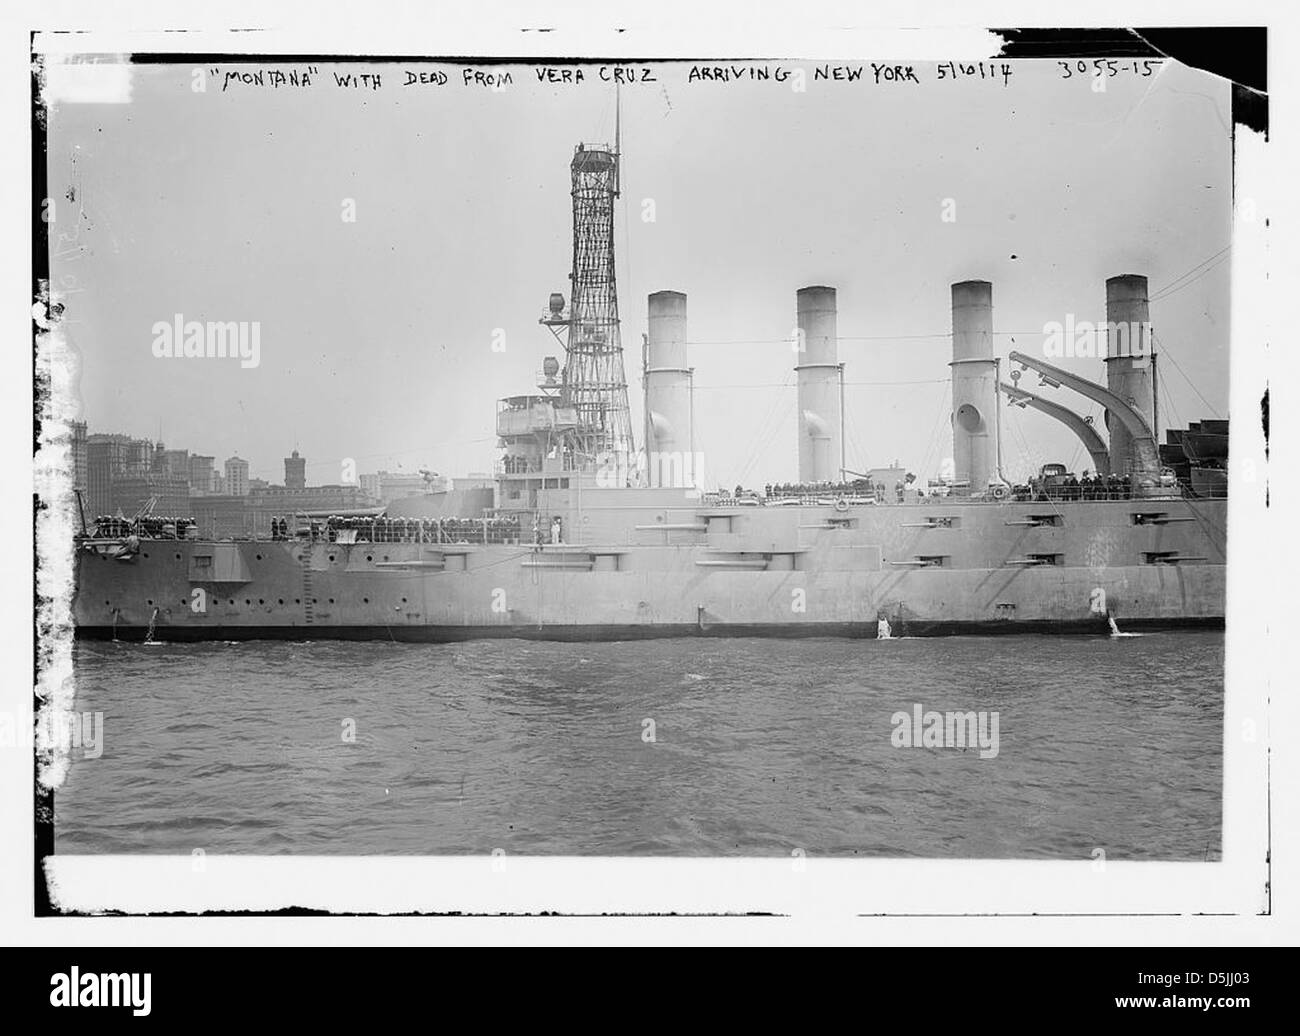 MONTANA with dead from Vera Cruz arriving N.Y., 5/10/14 (LOC) Stock Photo